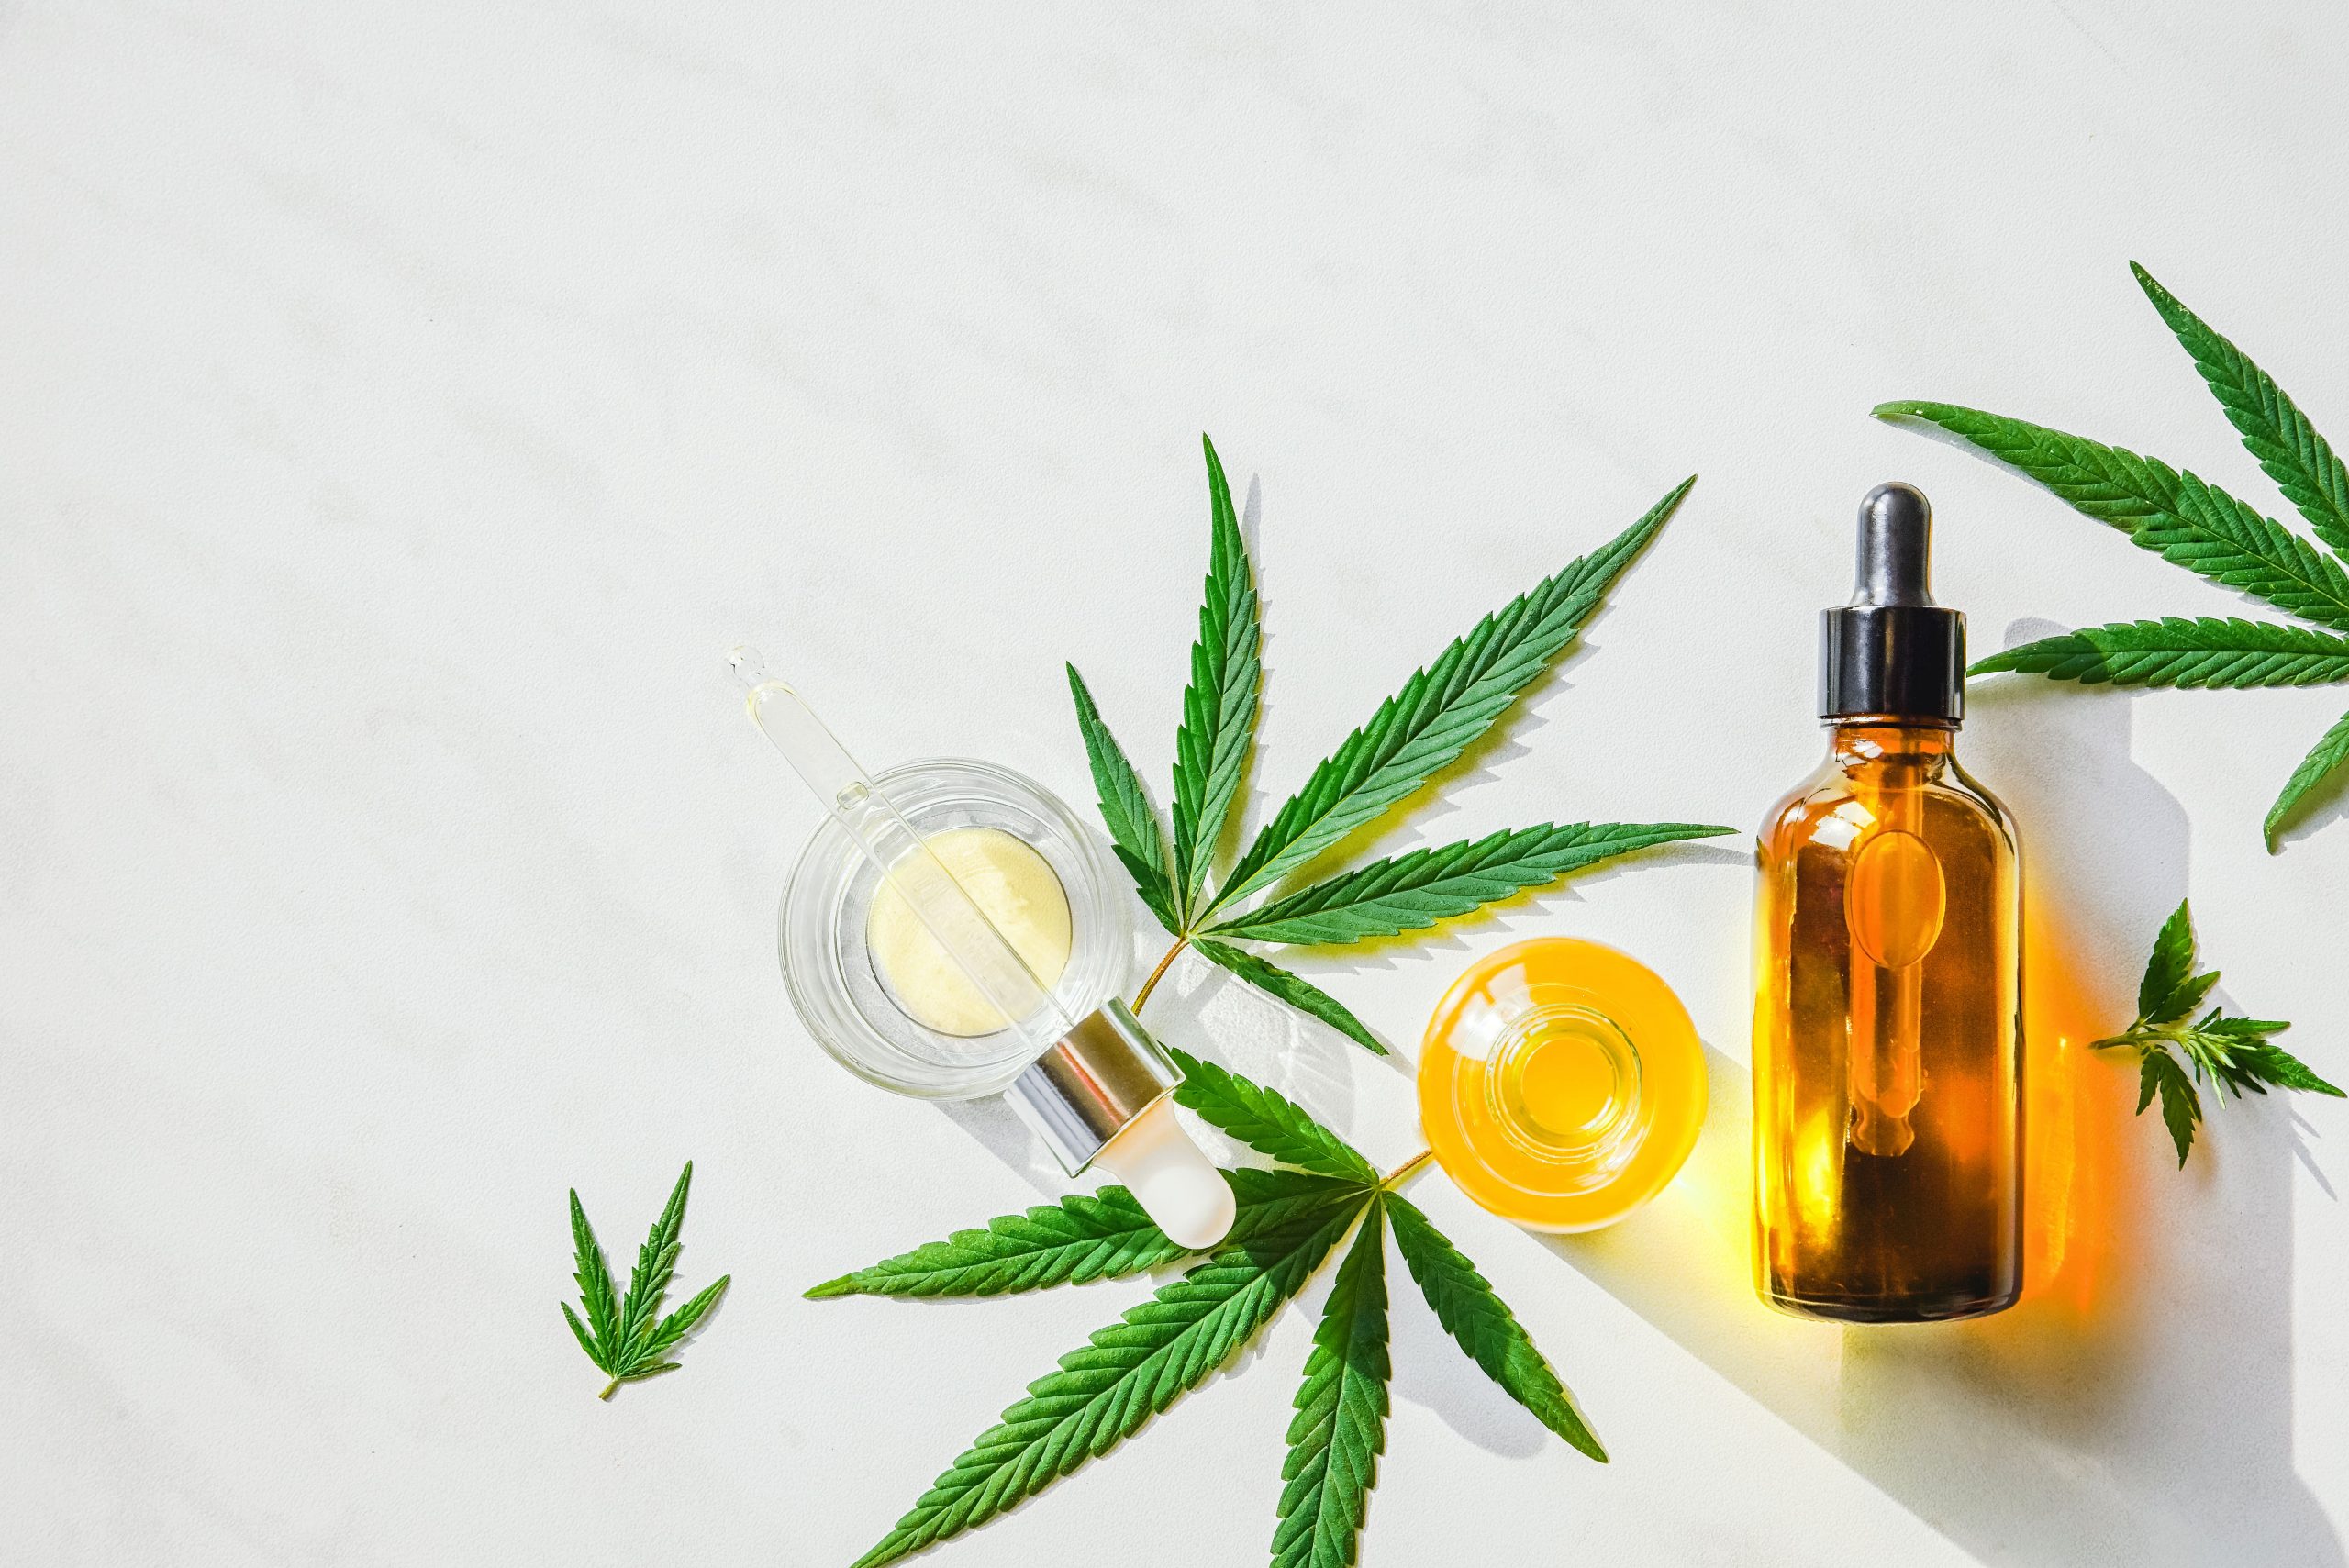 KNOW THE BENEFTS OF USING HIGH POTENCY CBD-min